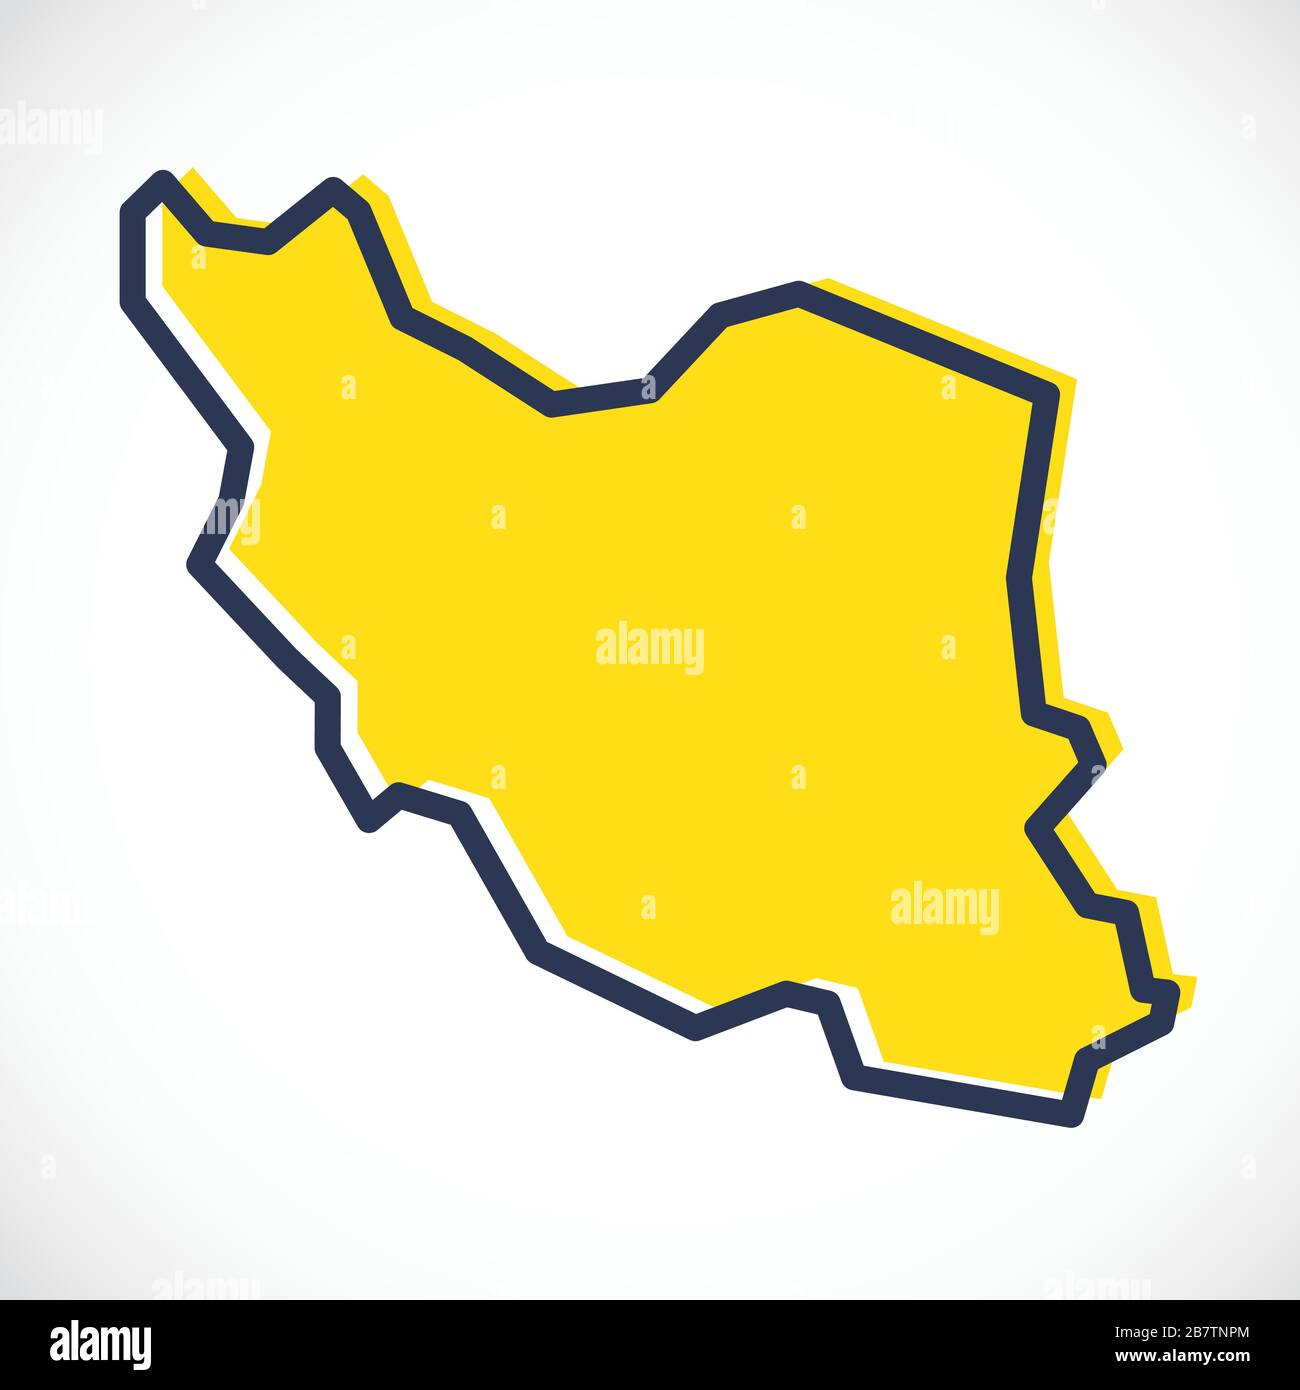 Stylized simple yellow outline map of Iran Stock Vector